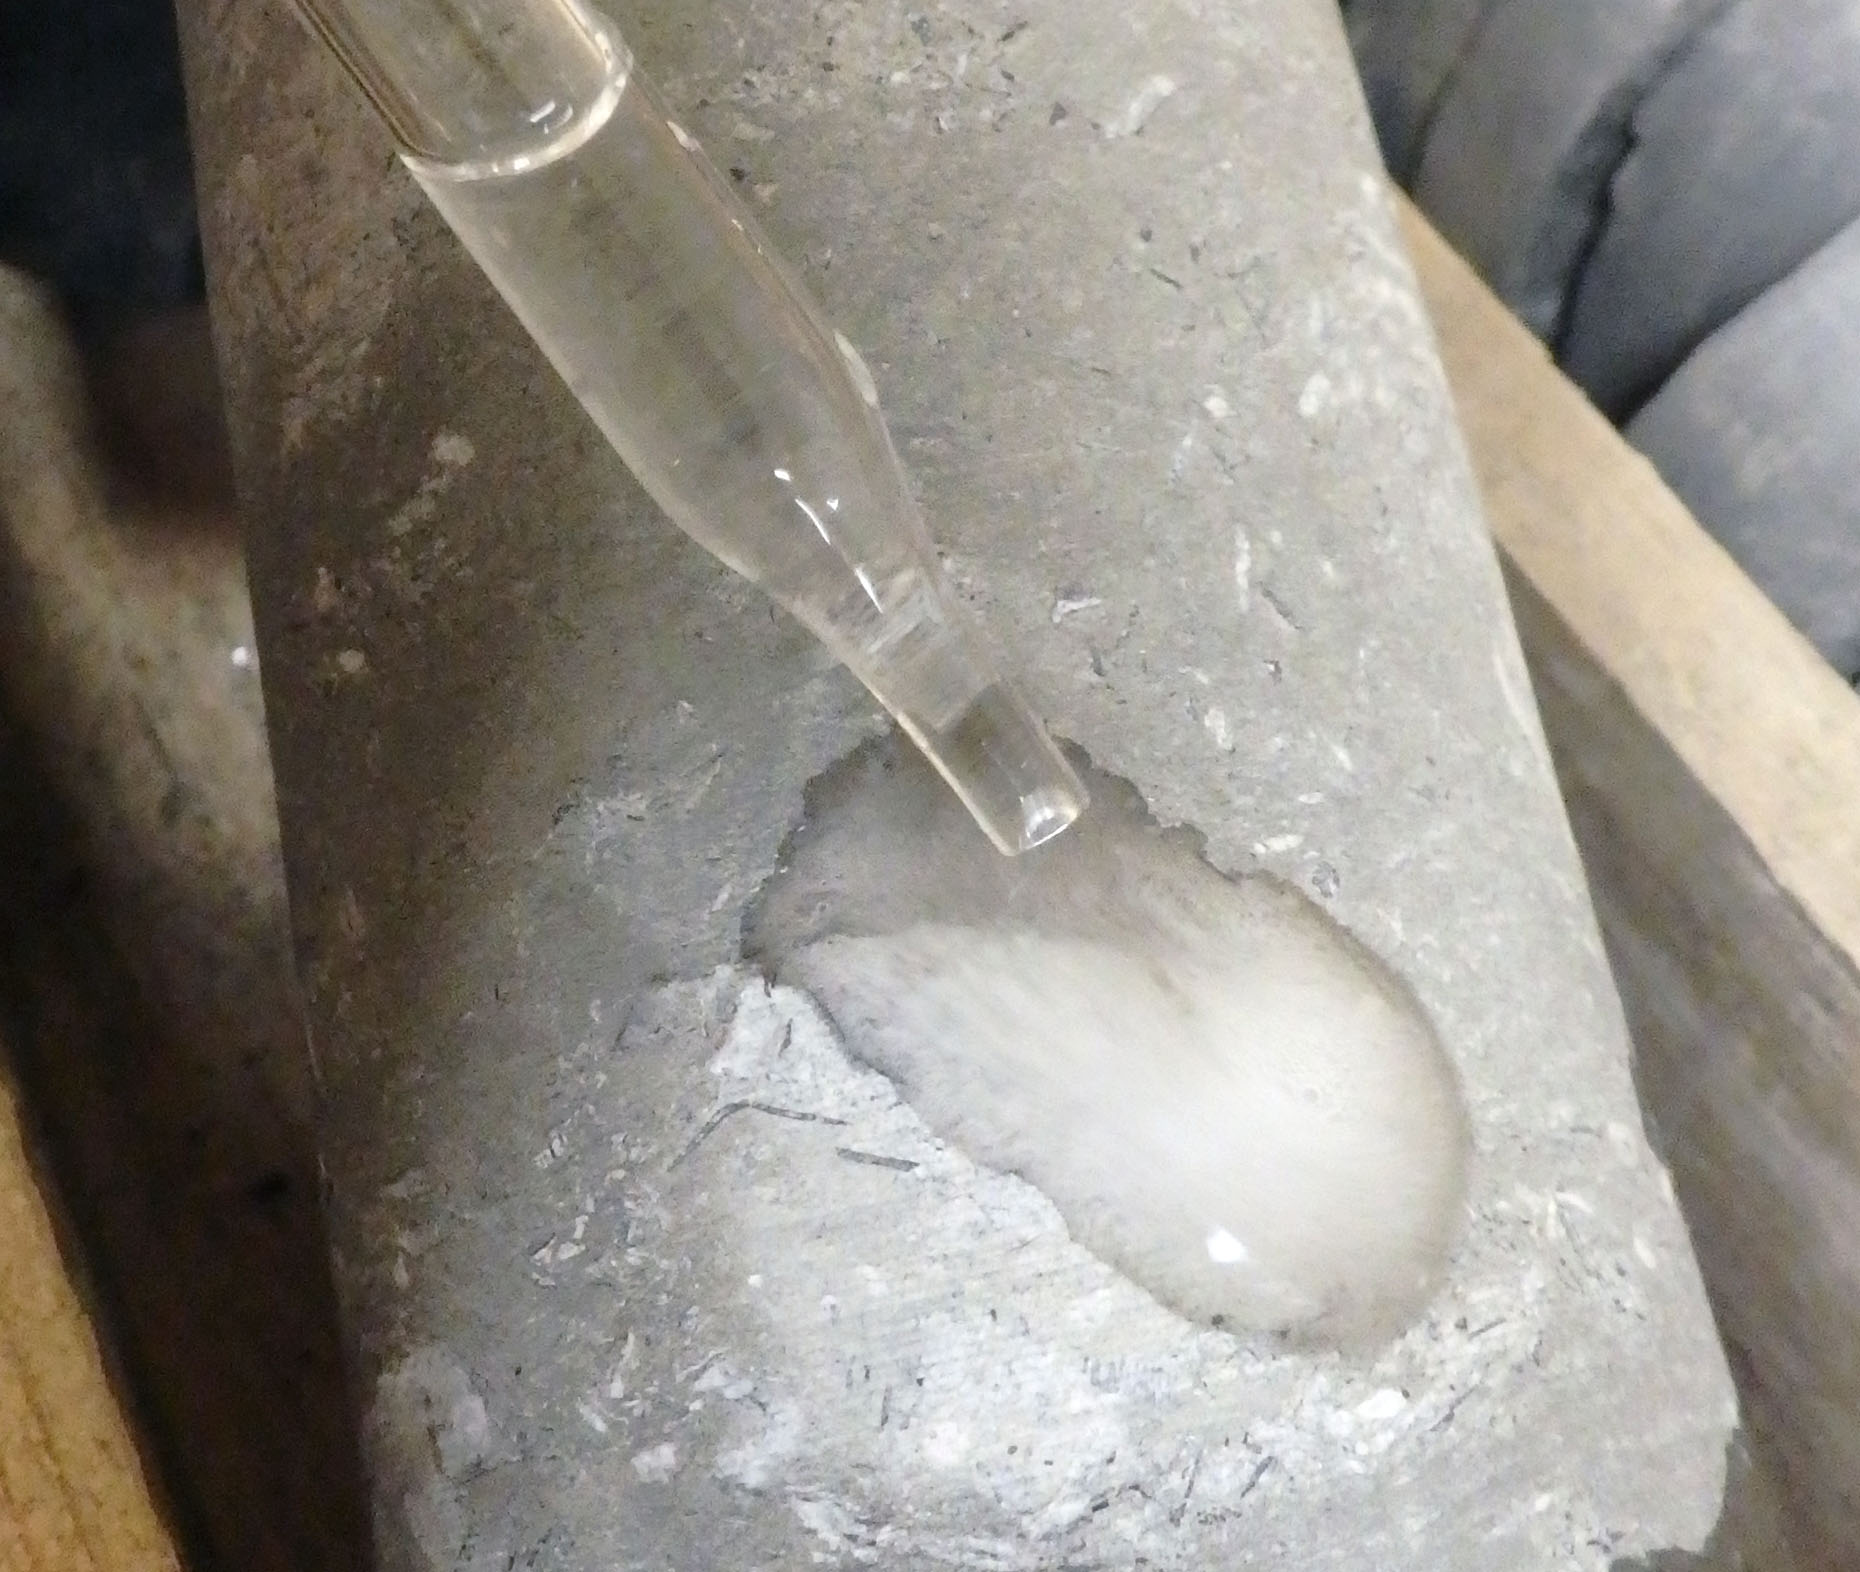 Testing core with dilute hydrochloric acid. If all parts of the rock fizz a lot, the rock is limestone.